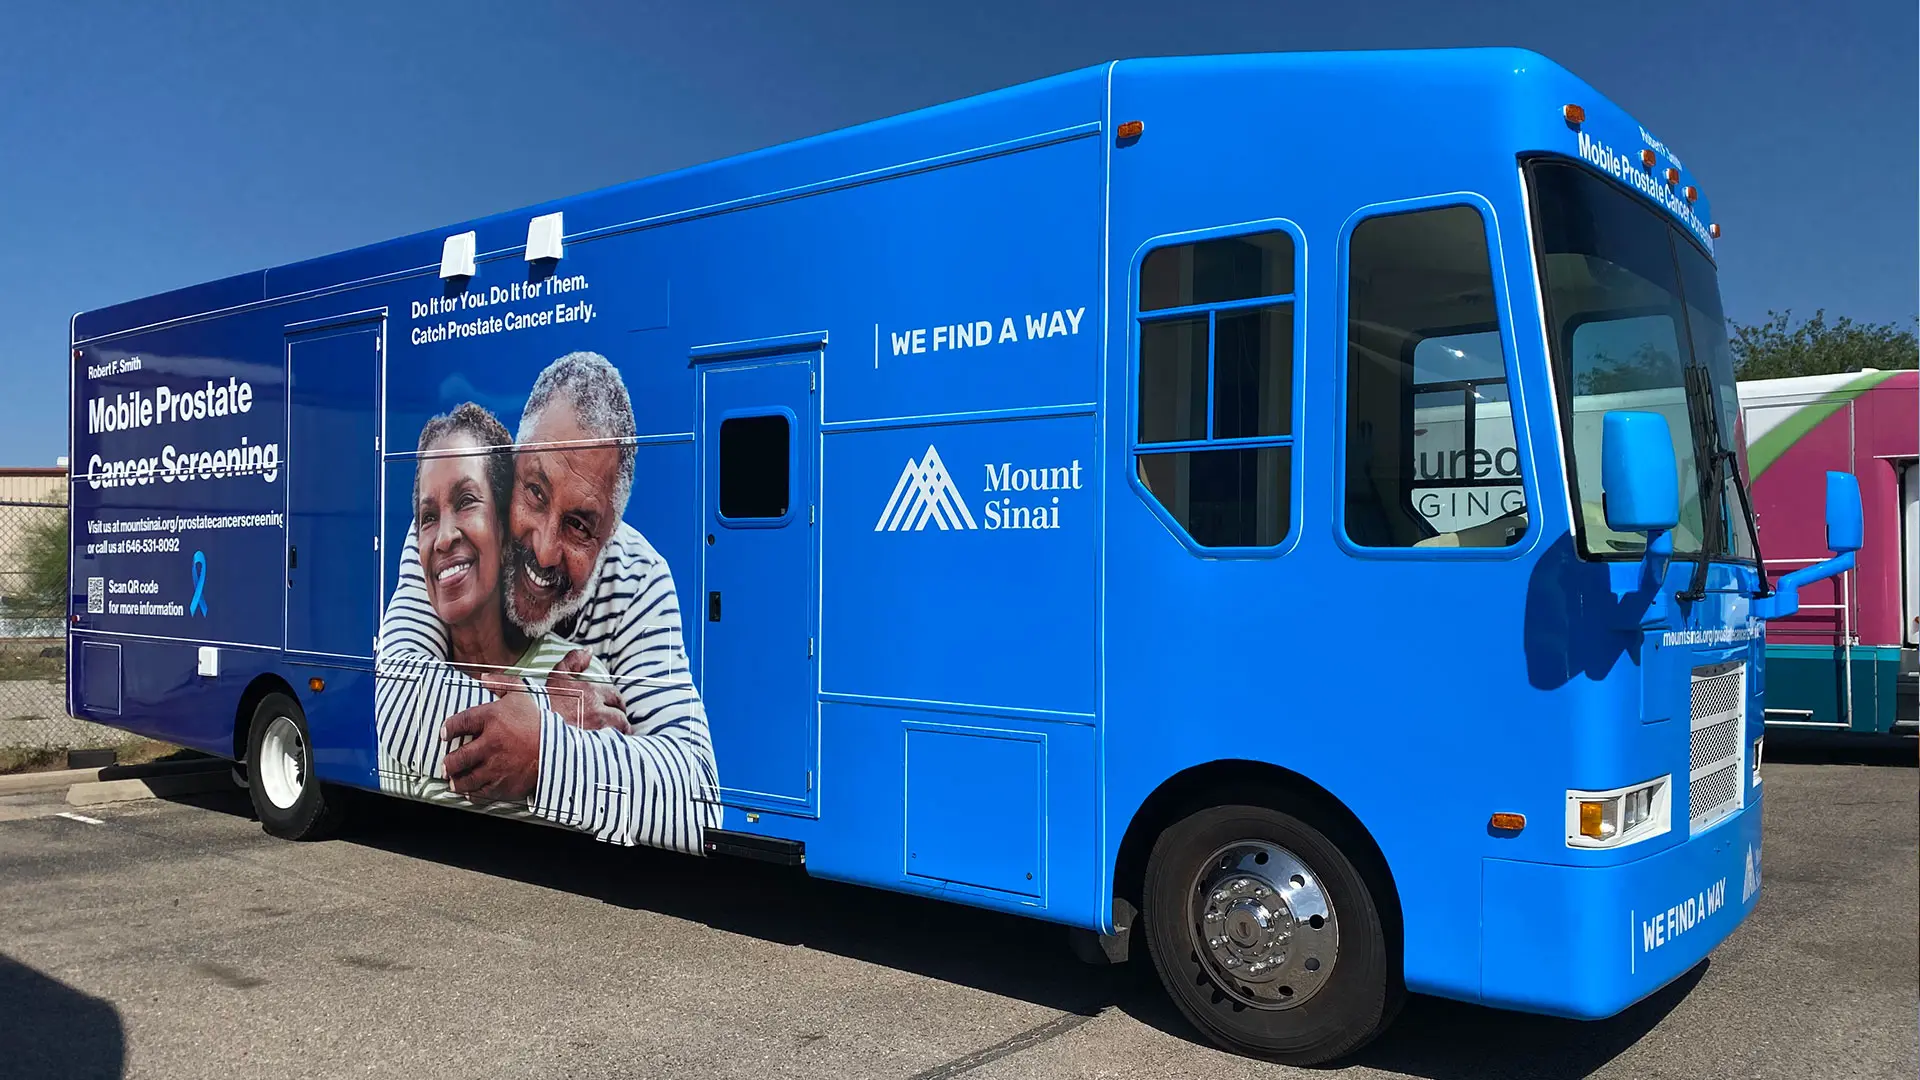 The Mount Sinai Robert F. Smith Mobile Prostate Cancer Screening Unit will address the high incidence of prostate cancer in the Black community.